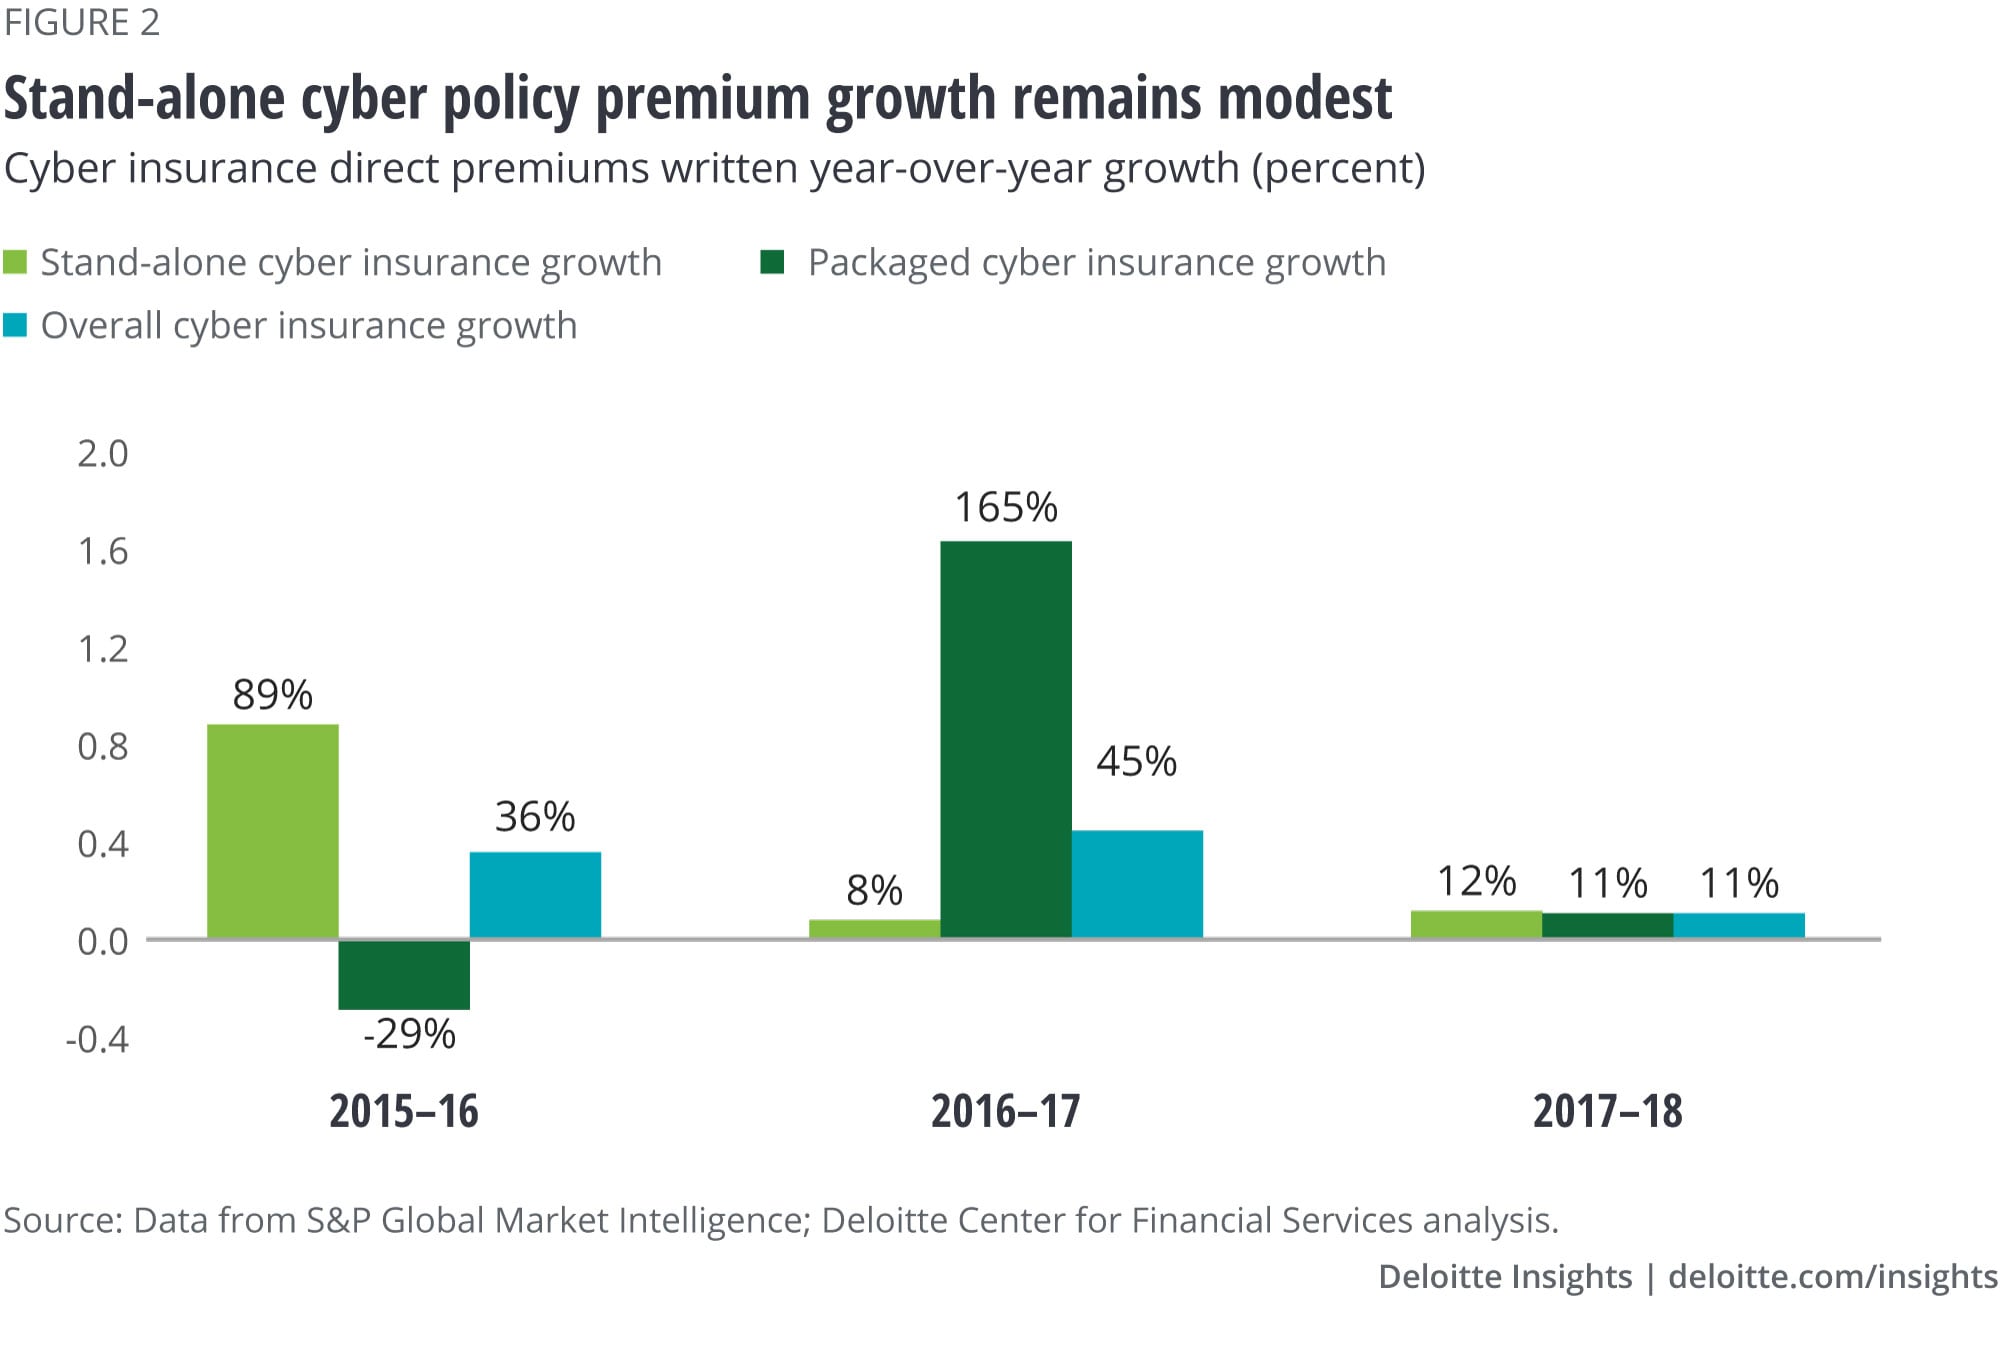 Standalone cyber policy premium growth remains modest